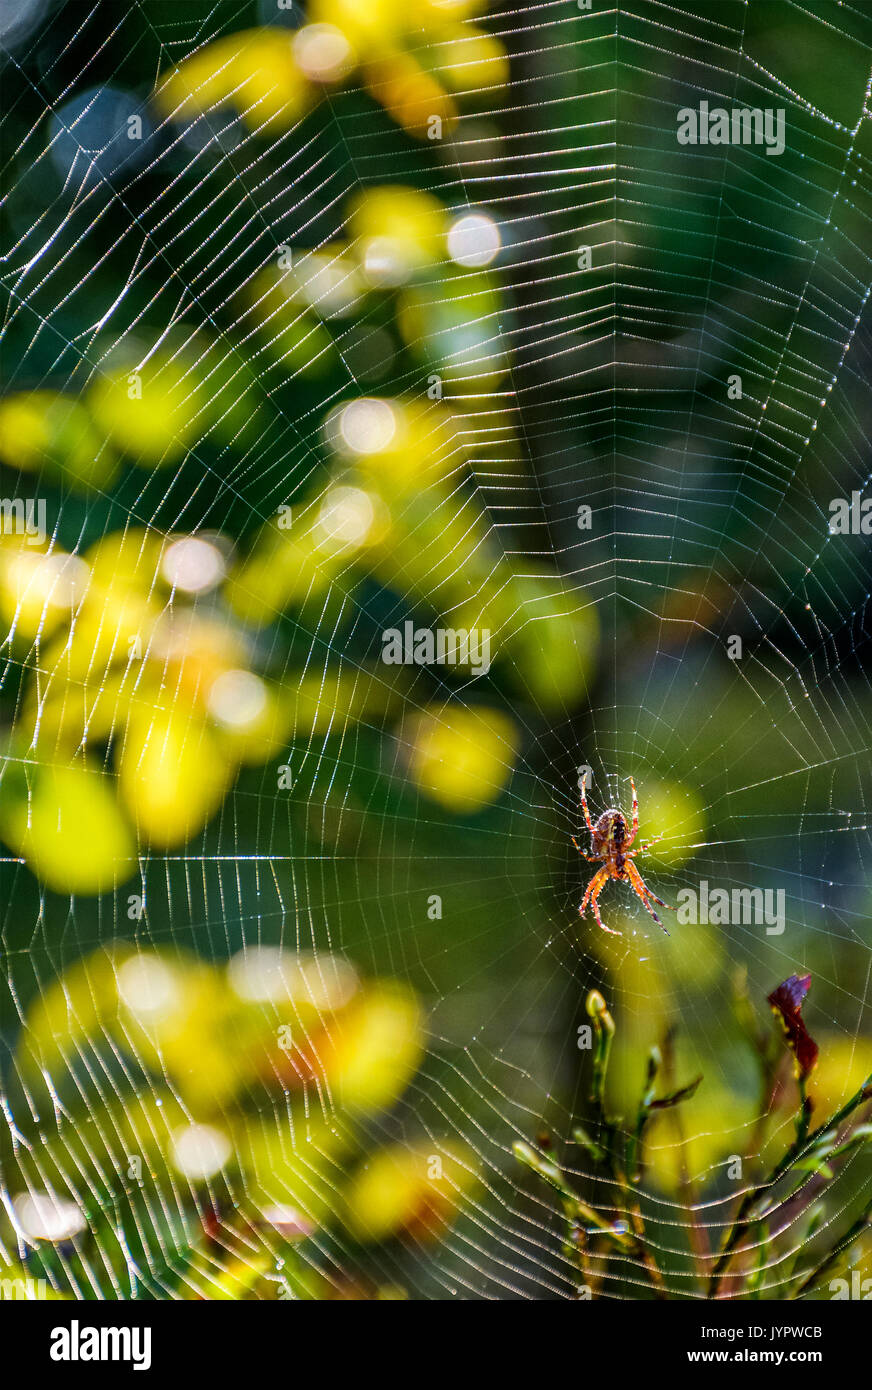 lovely background with spider in the web on beautiful foliage bokeh Stock Photo